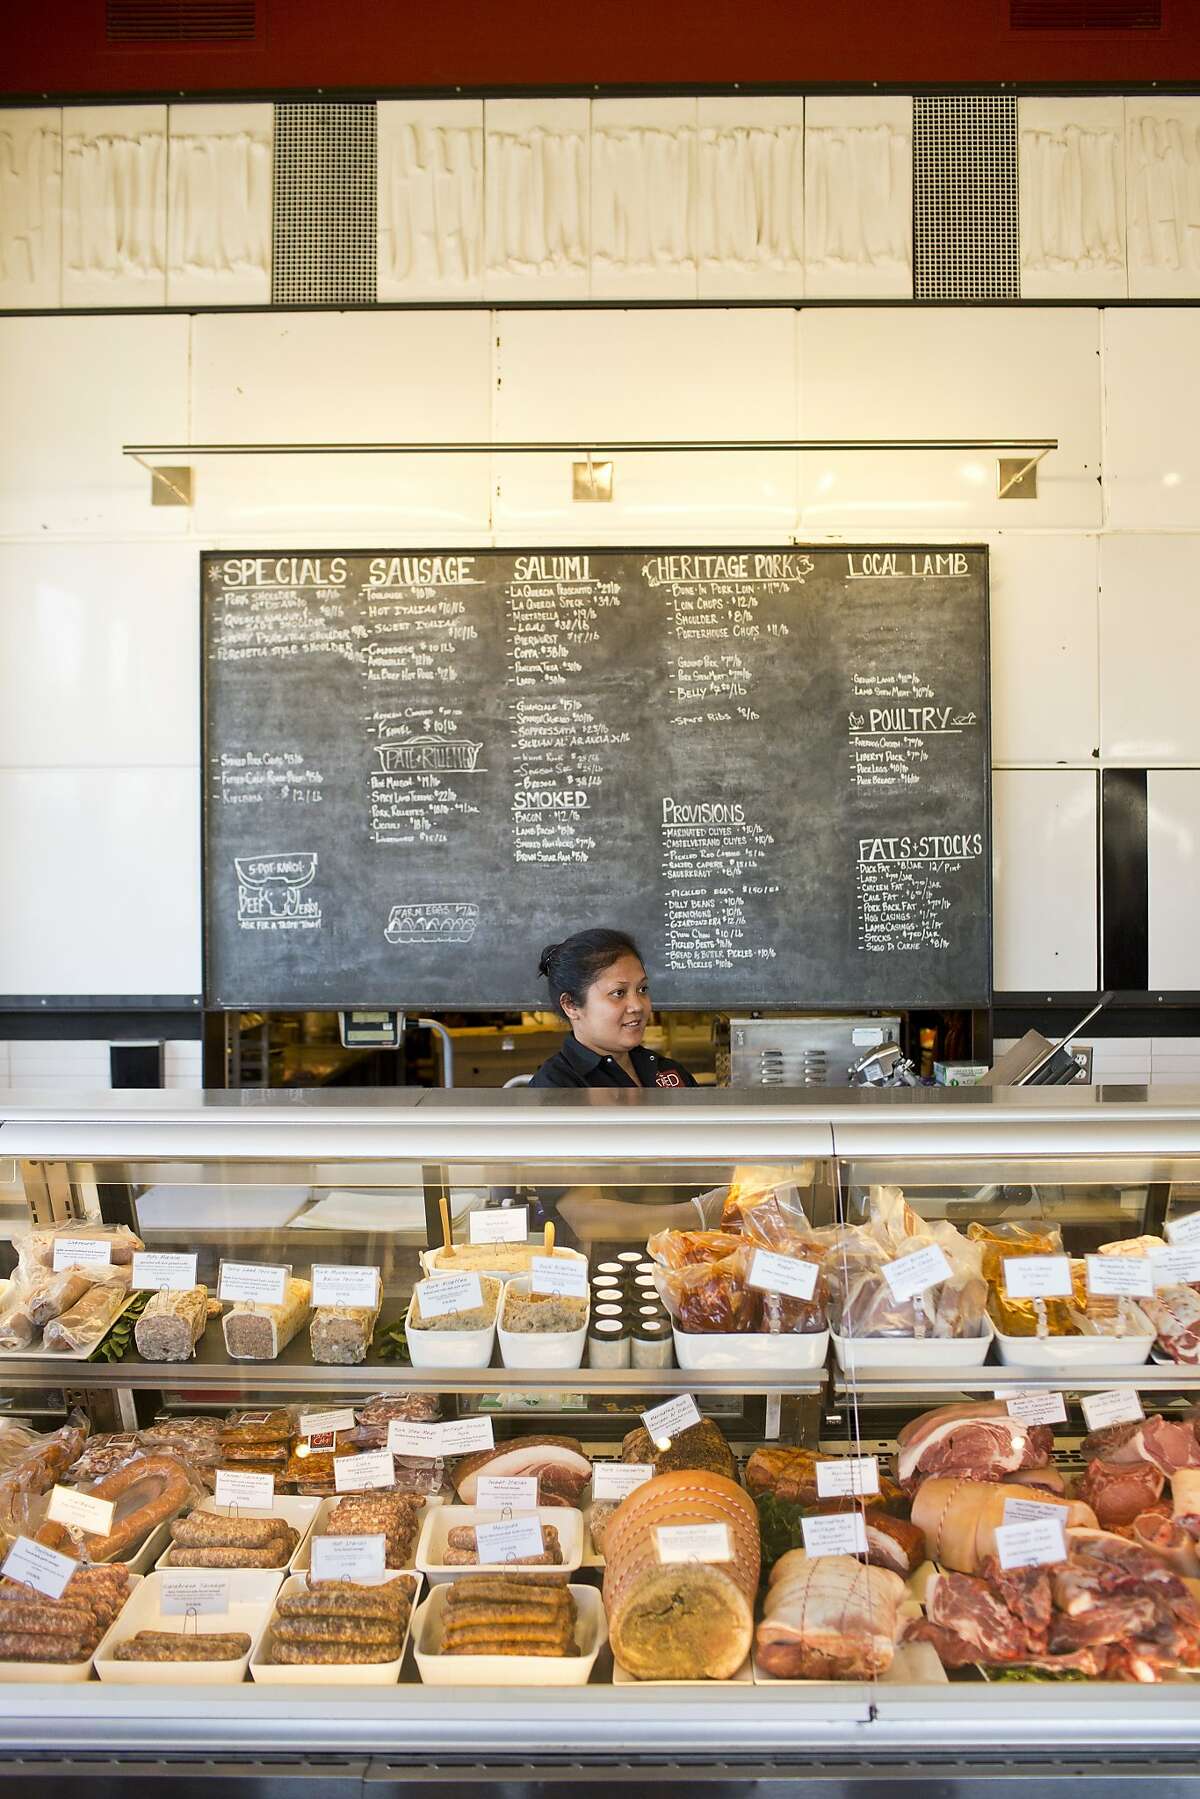 Novita Sobacua takes orders behind the counter at Fatted Calf at the Oxbow Public Market in Napa, Calif., Friday, October 4, 2013.